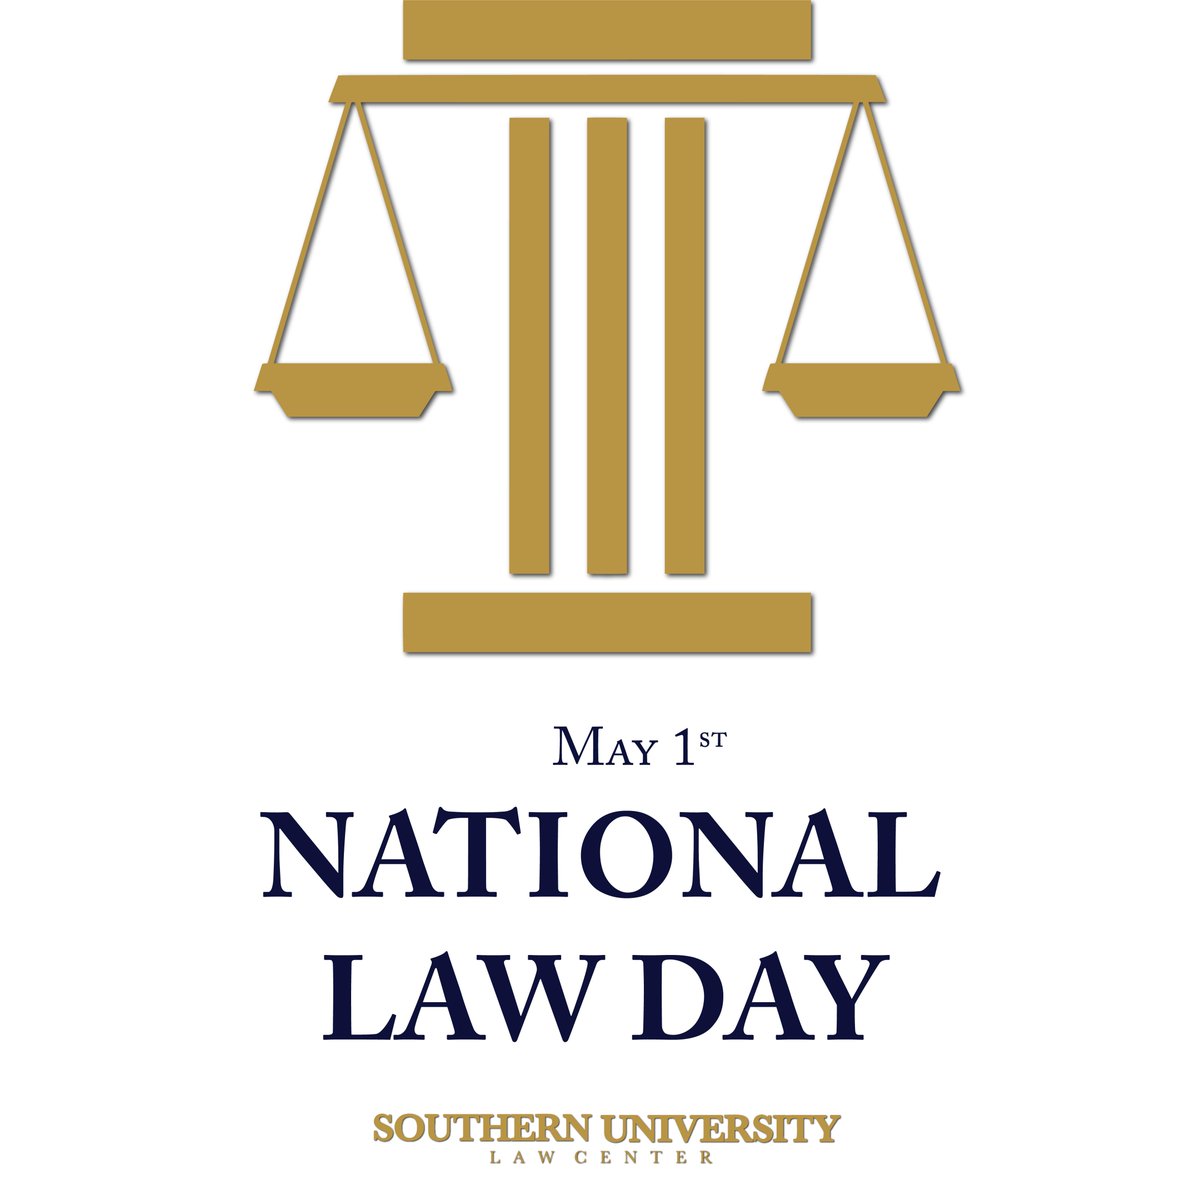 Today, we celebrate the foundation of justice and equality. Happy National Law Day ⚖️! #LawDay #JusticeForAll